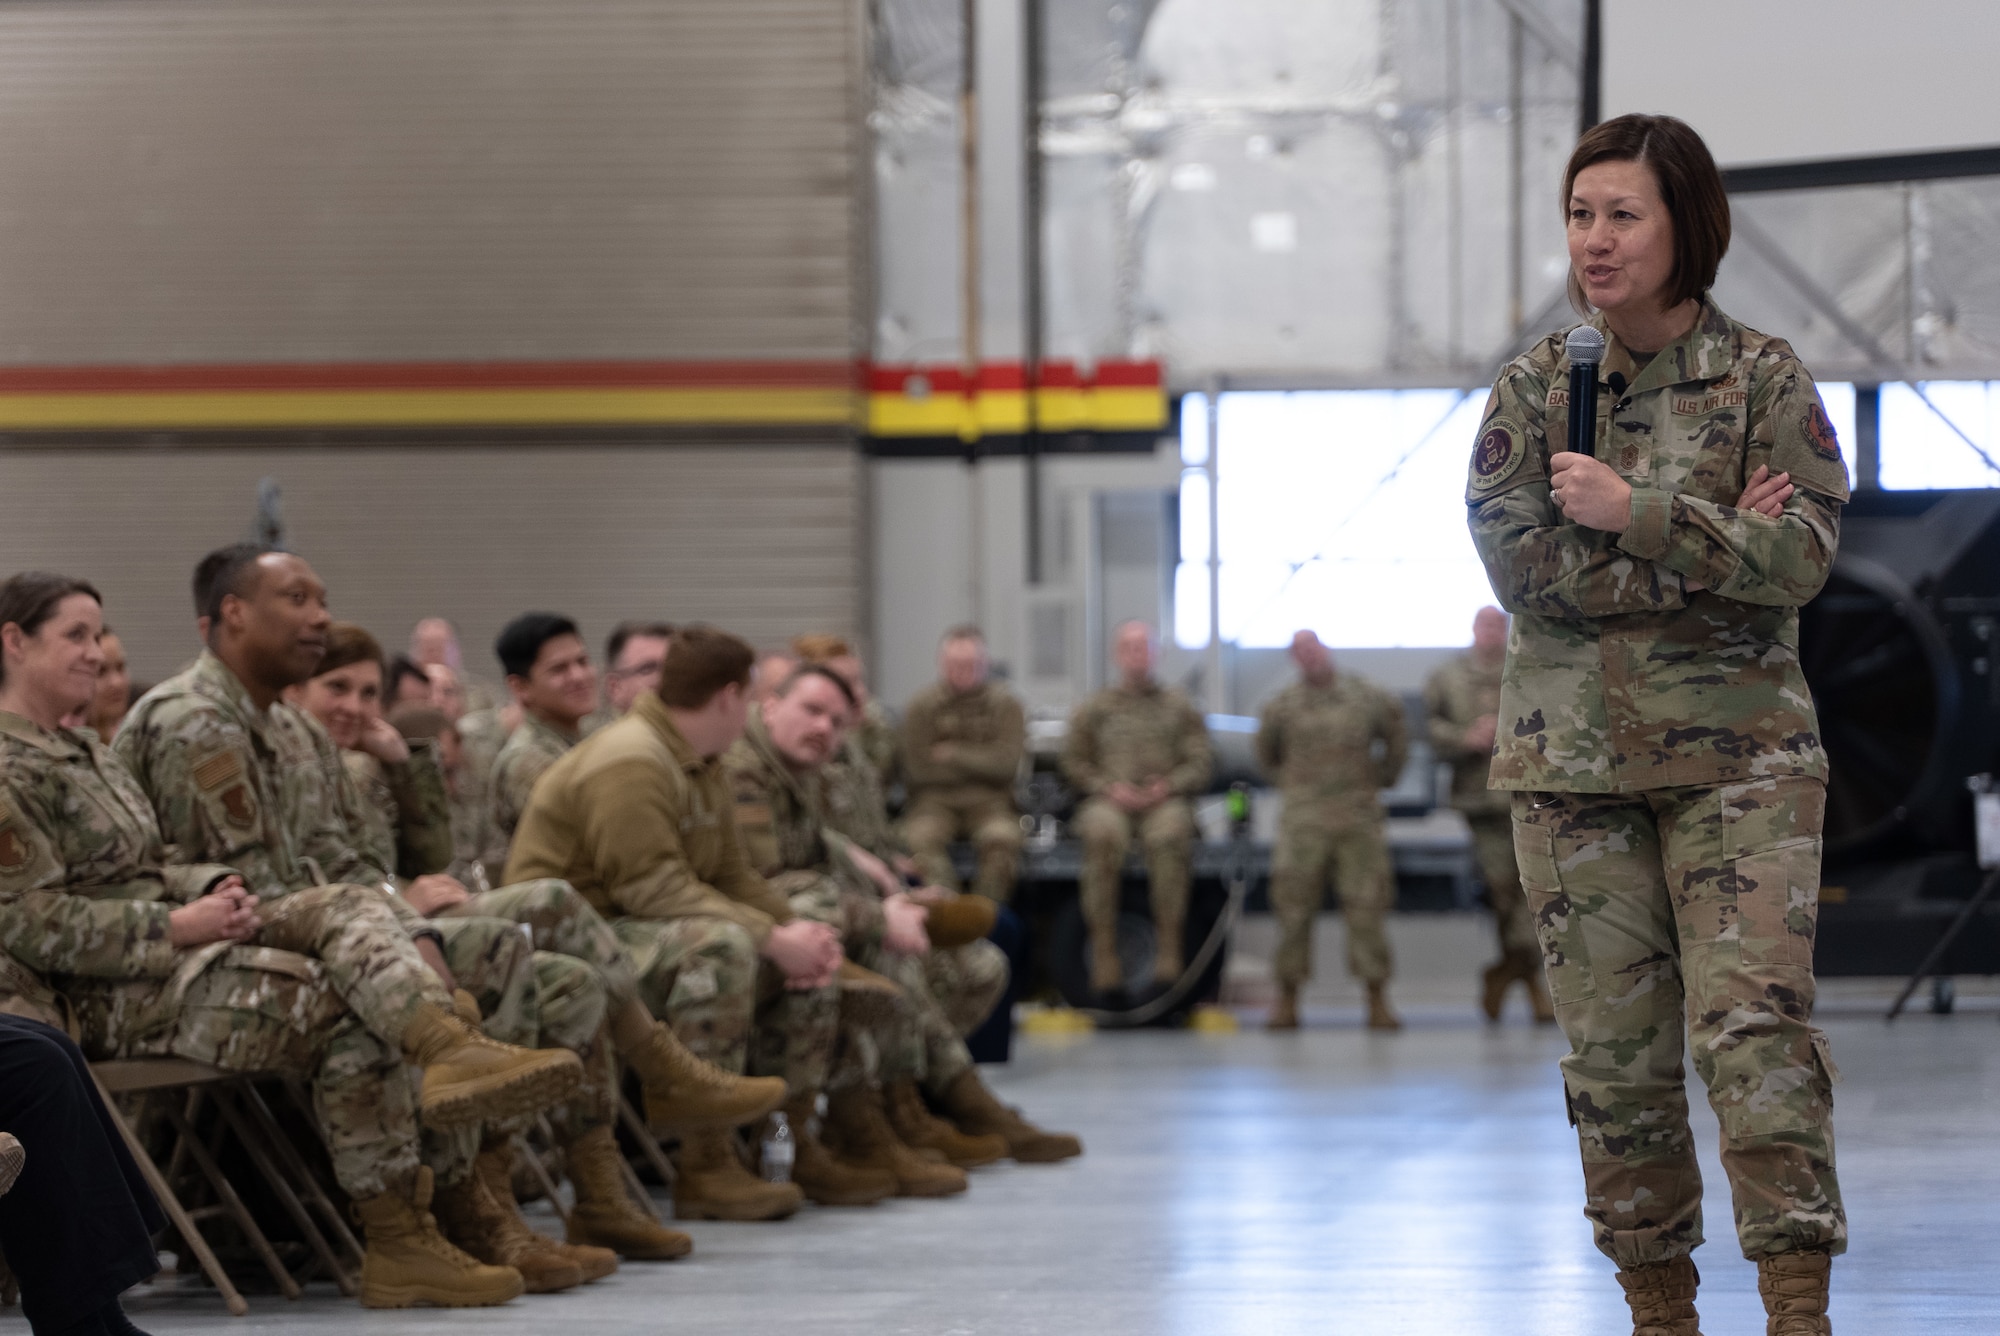 Chief Master Sgt. of the Air Force JoAnne S. Bass speaks at an all-call inside a hangar on Hill Air Force Base